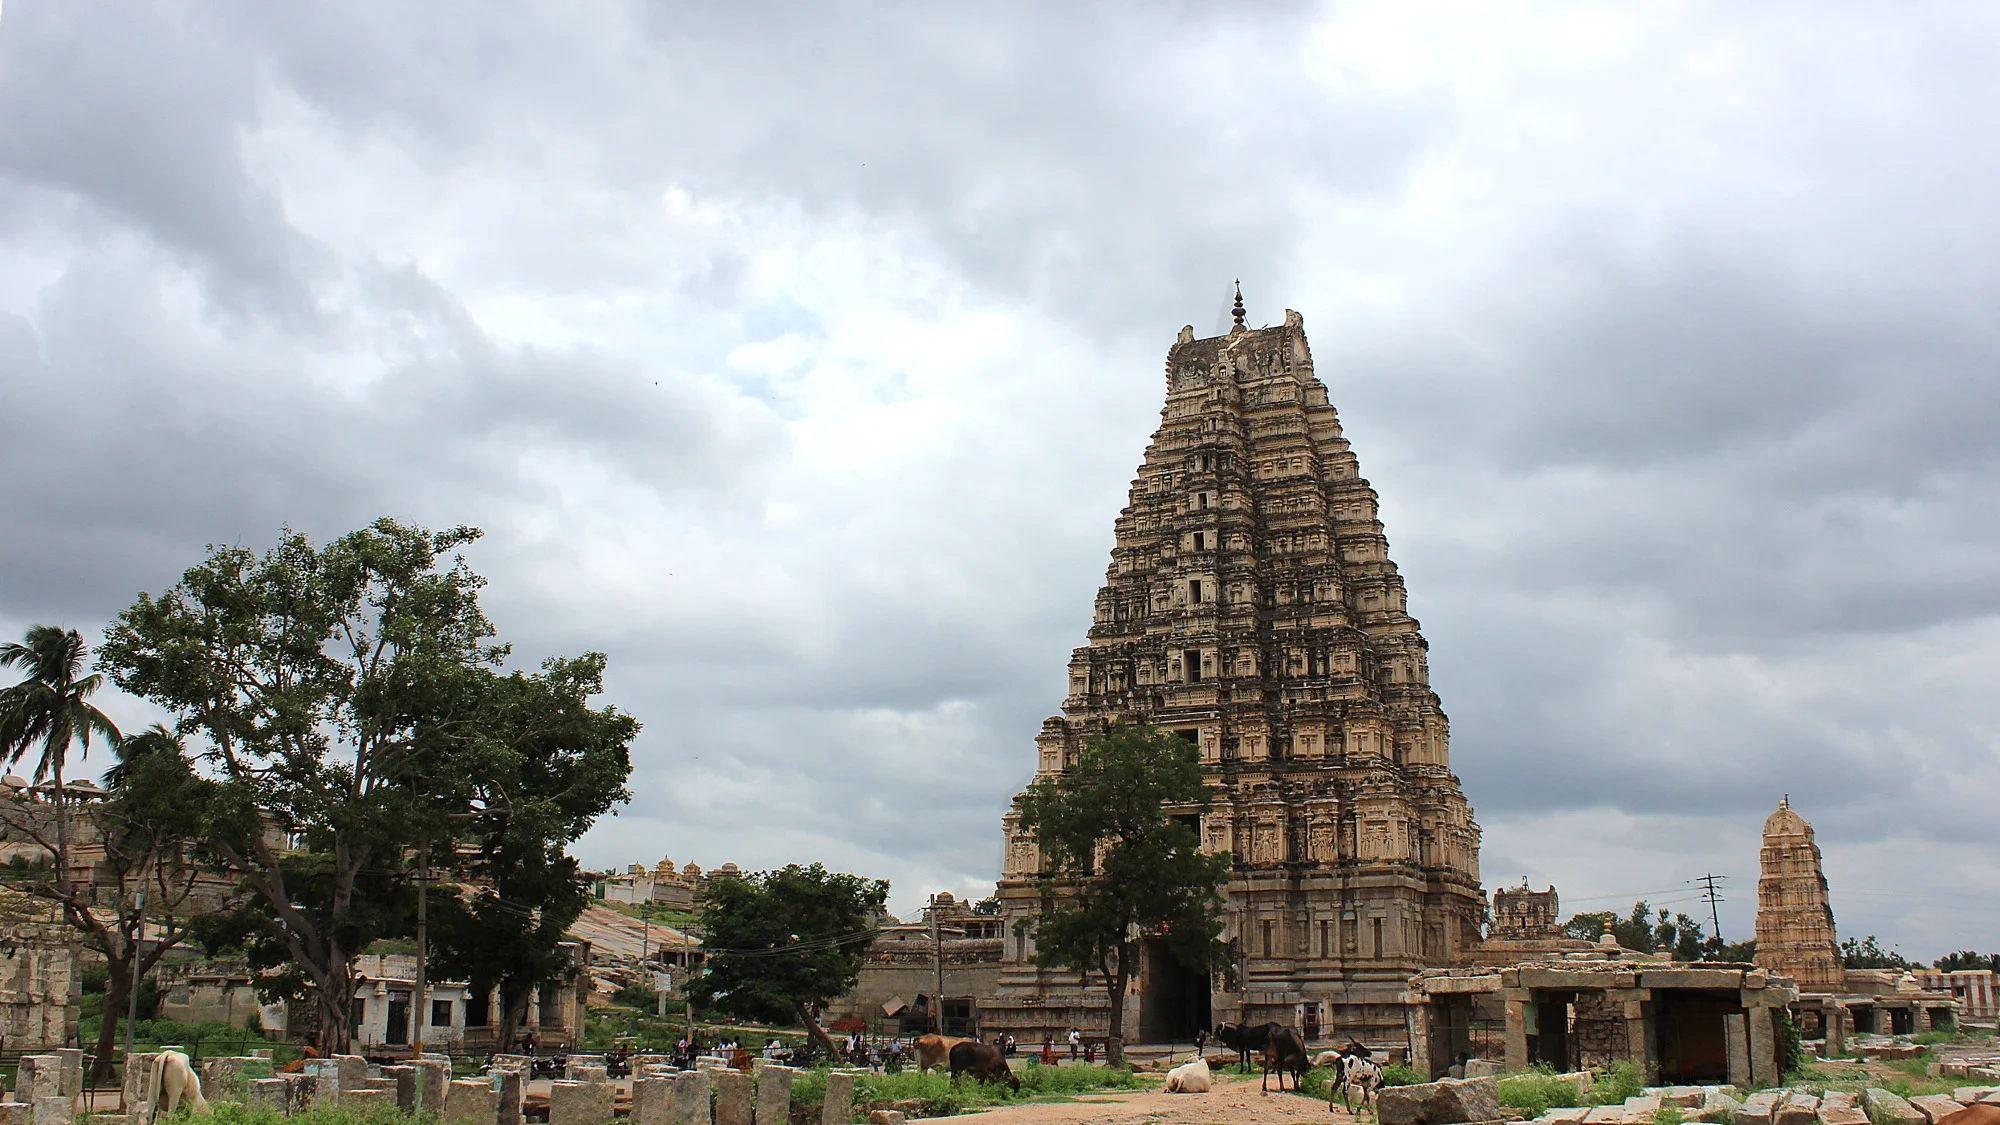 The Virupaksha Temple tower in Hampi with grey clouds in the background. The temple was built when Hampi was the capital of Vijayanagar empire.